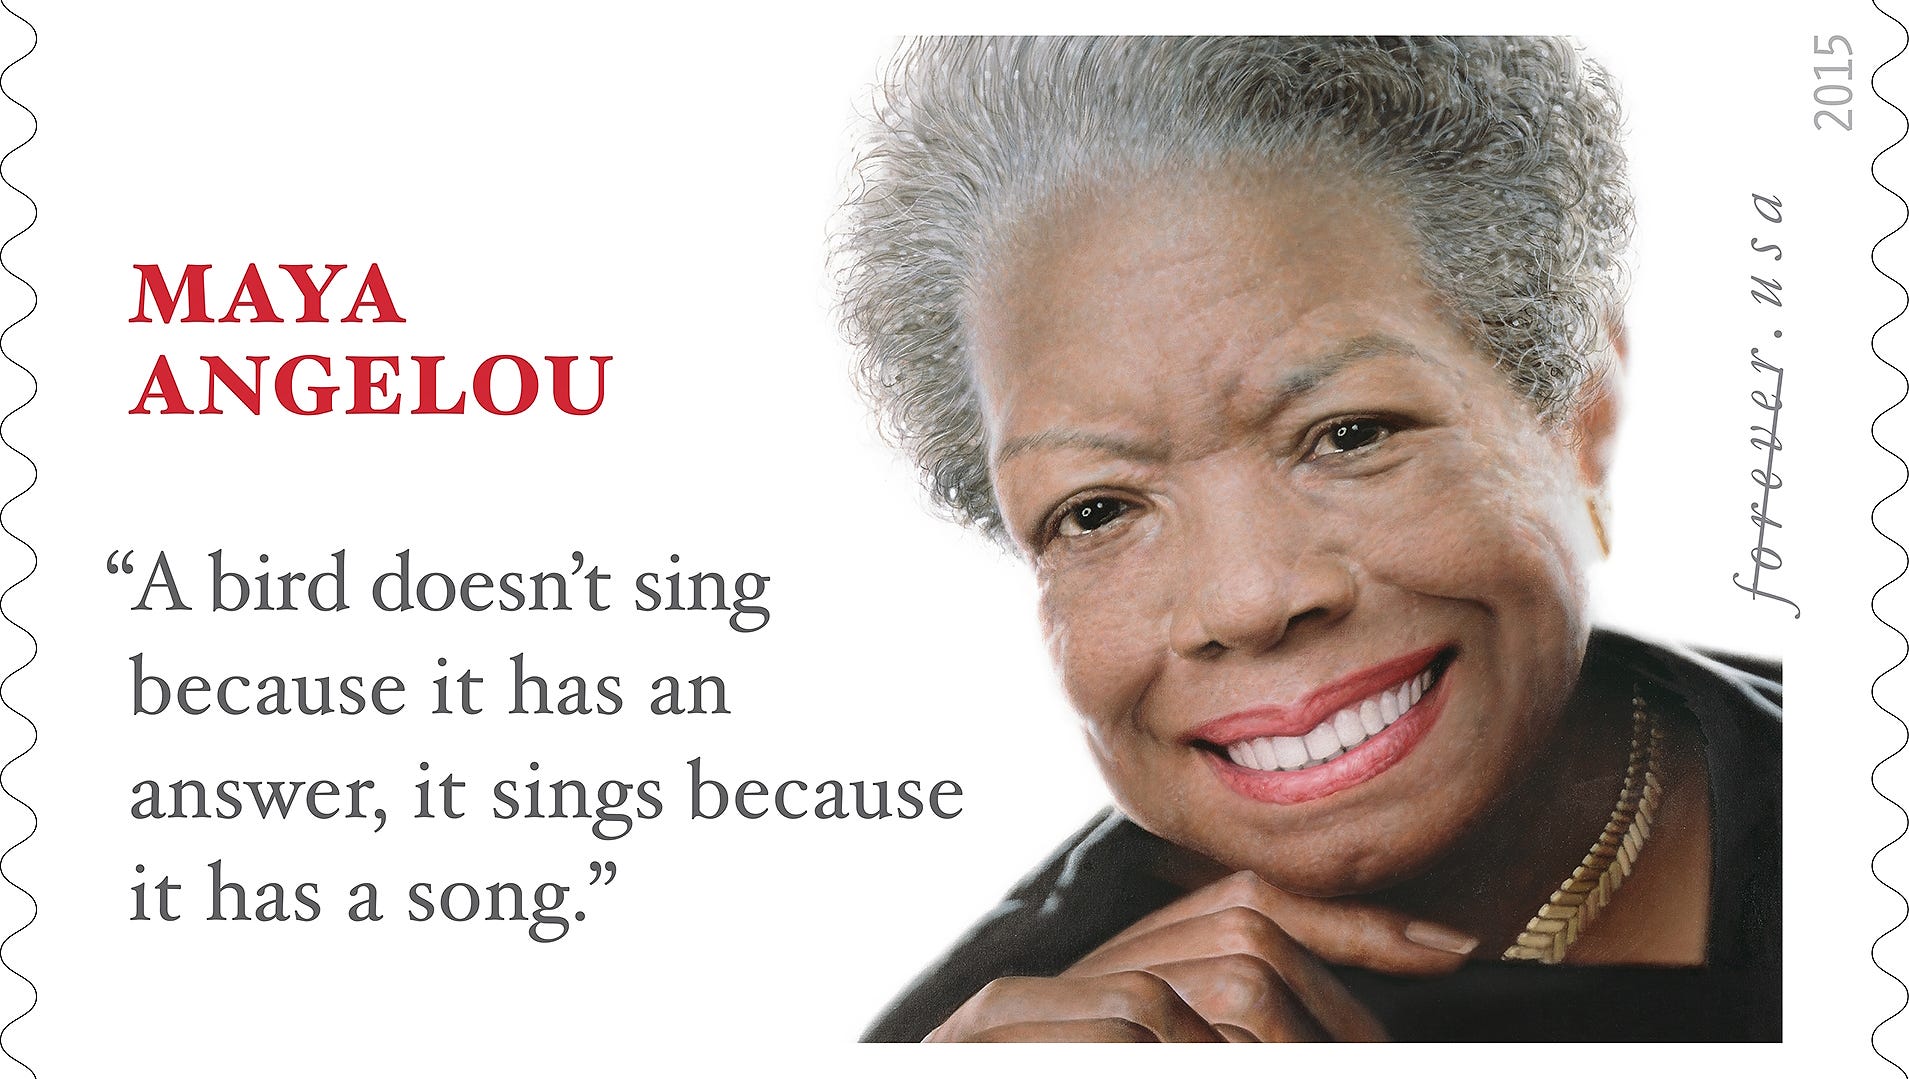 Maya Angelou Forever Stamp is unveiled